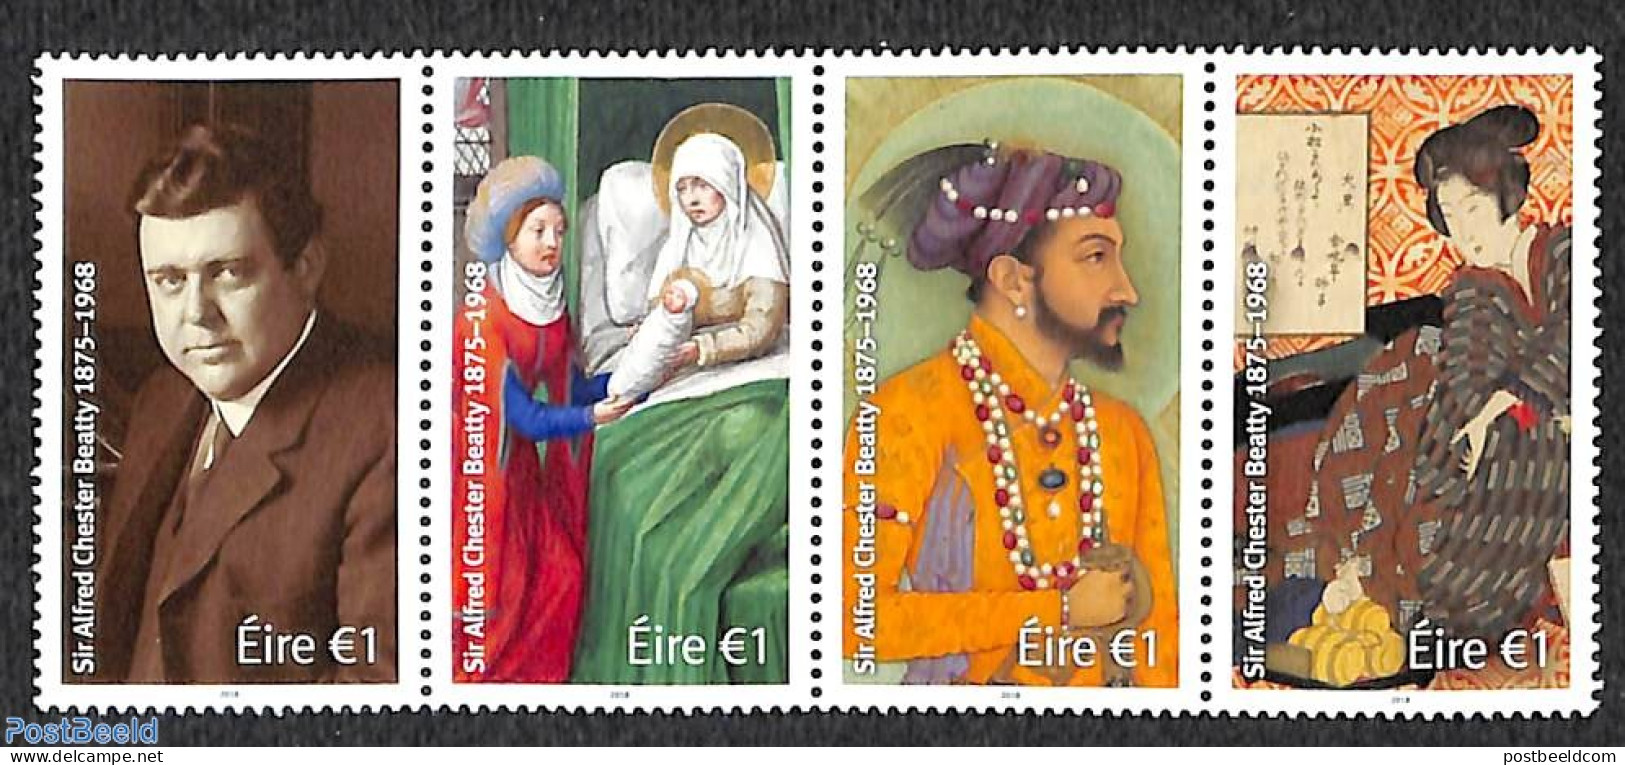 Ireland 2018 Sir Alfred Chester Beatty 4v [:::], Mint NH, Art - Paintings - Unused Stamps